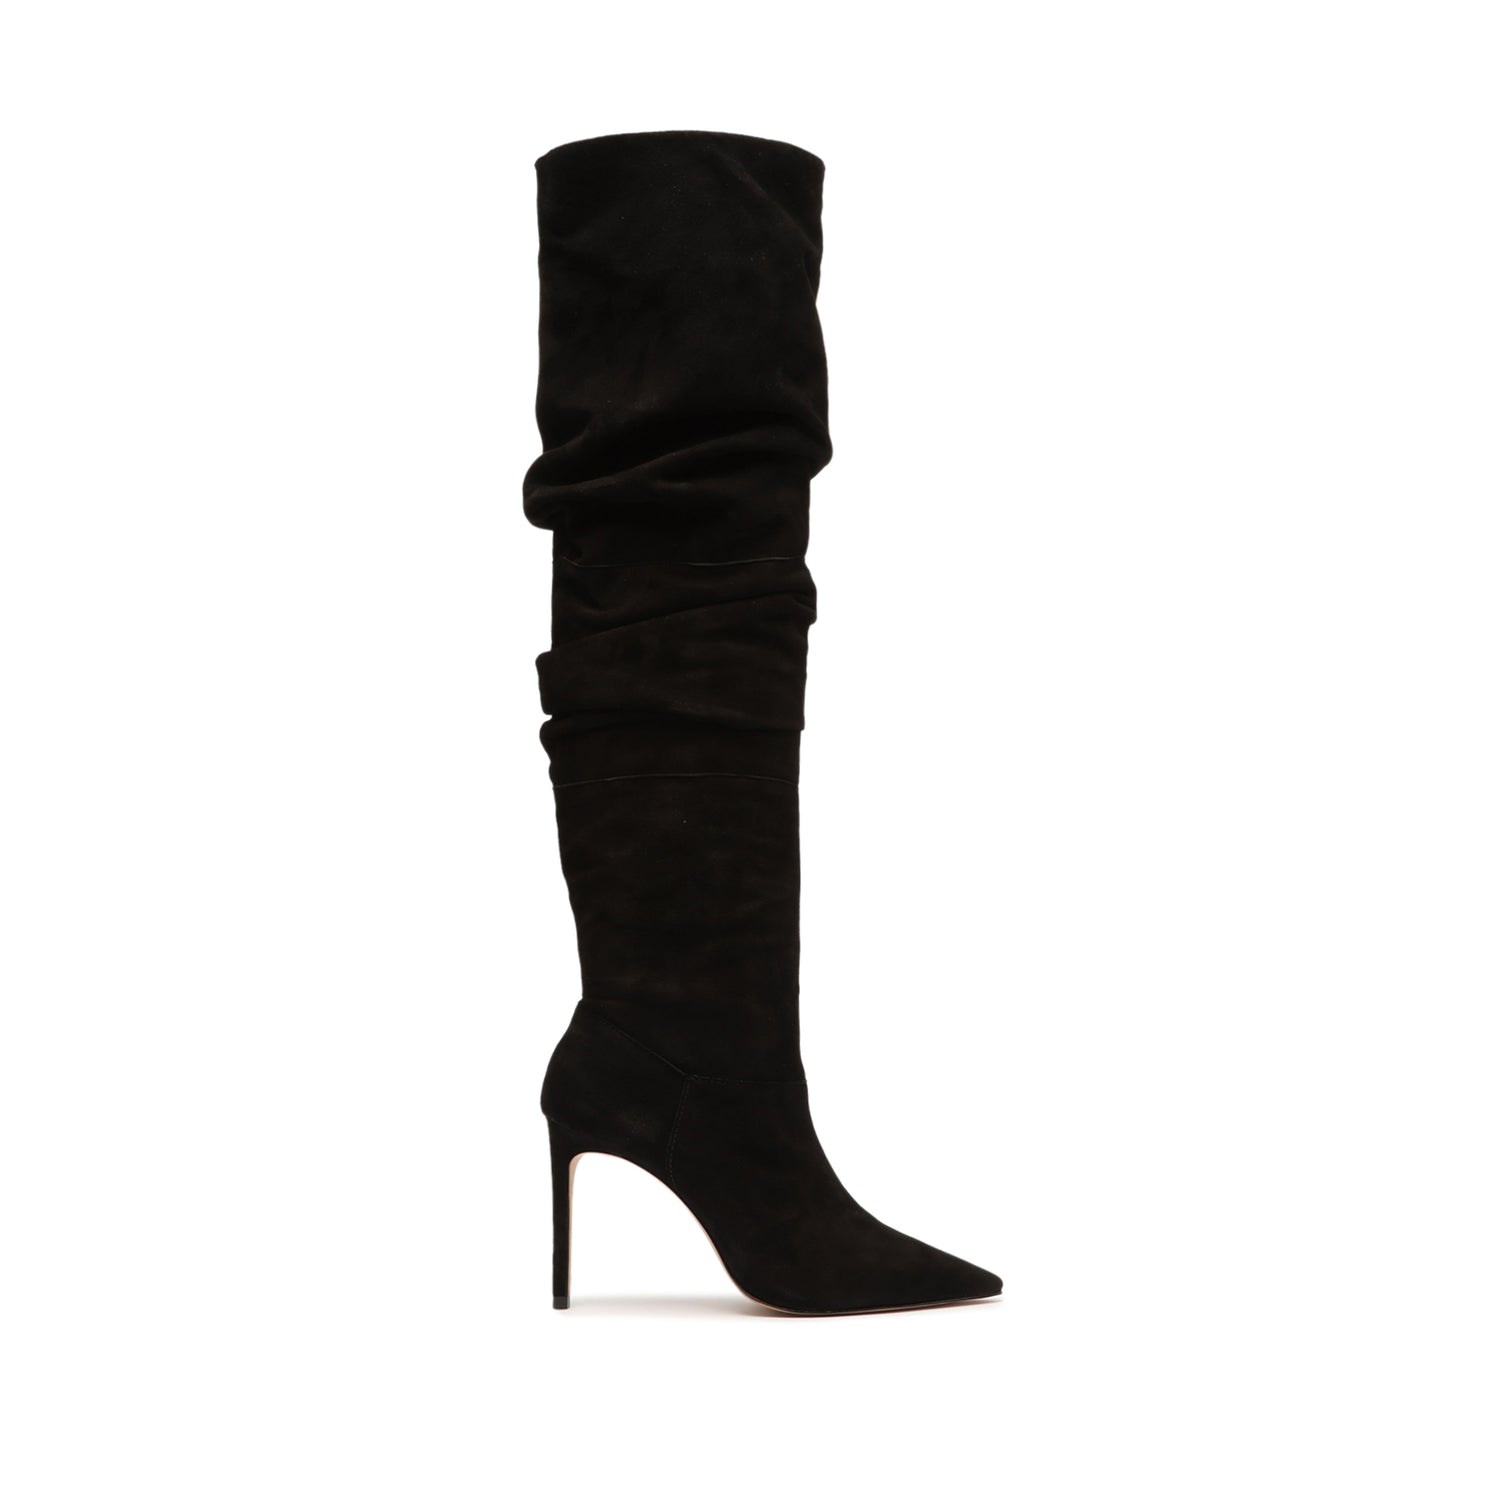 Ashlee Over The Knee Suede Boot Boots FALL 23 5 Black Suede - Schutz Shoes